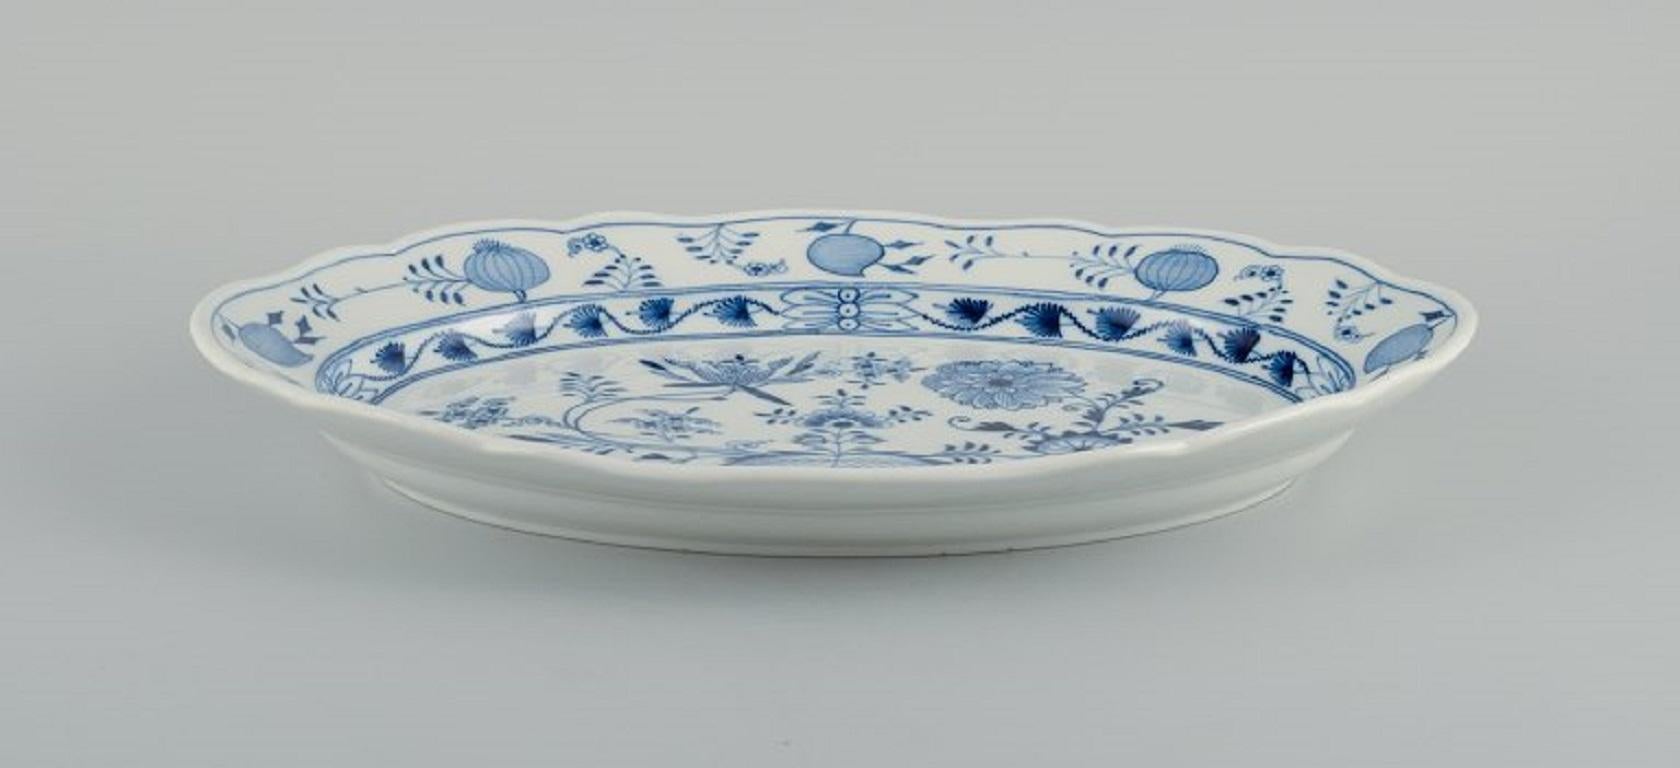 Meissen, Blue Onion oval dish in porcelain.
circa 1900.
First factory quality.
Perfect condition.
Marked.
Dimensions: L 41.5 x D 30.5 x H 6.0 cm.